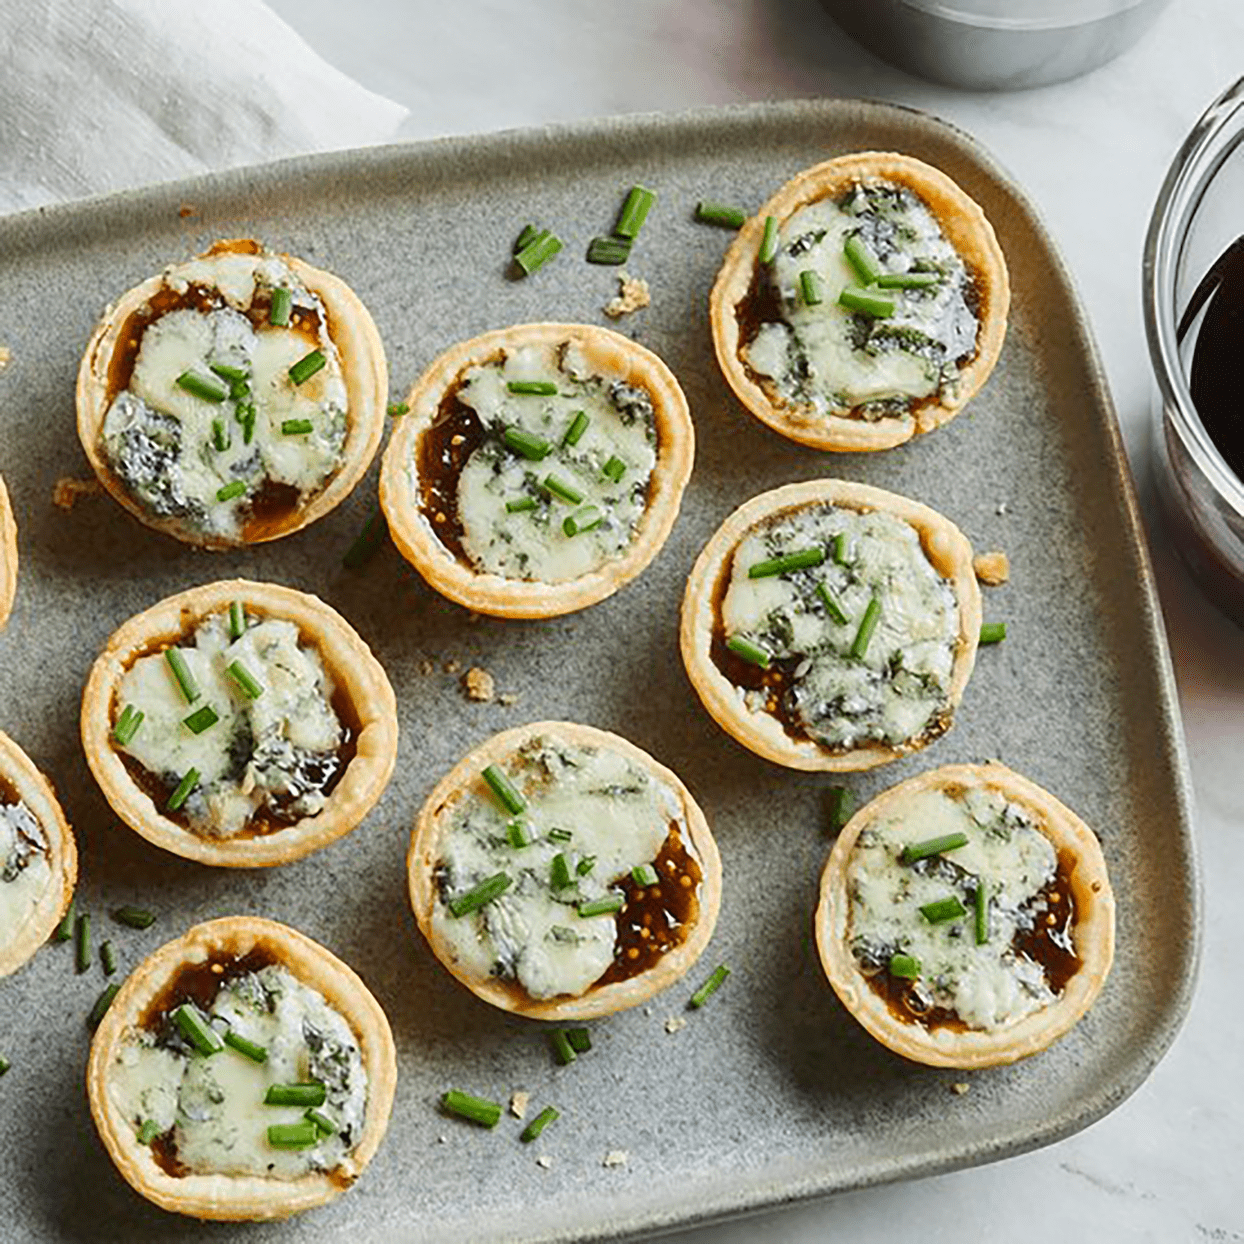 10+ Dietitian-Approved Appetizers for Friendsgiving